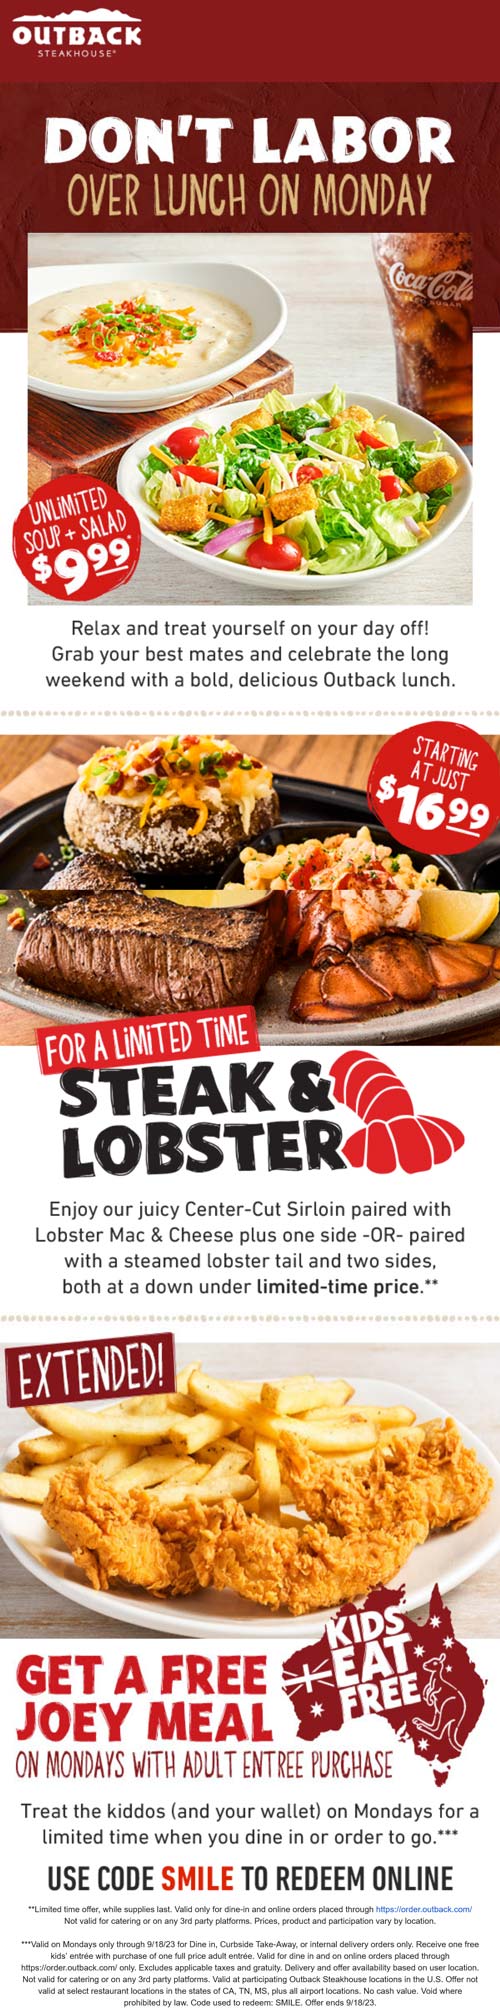 Outback Steakhouse restaurants Coupon  Bottomless soup & salad = $10, free kids meal & more today at Outback Steakhouse #outbacksteakhouse 